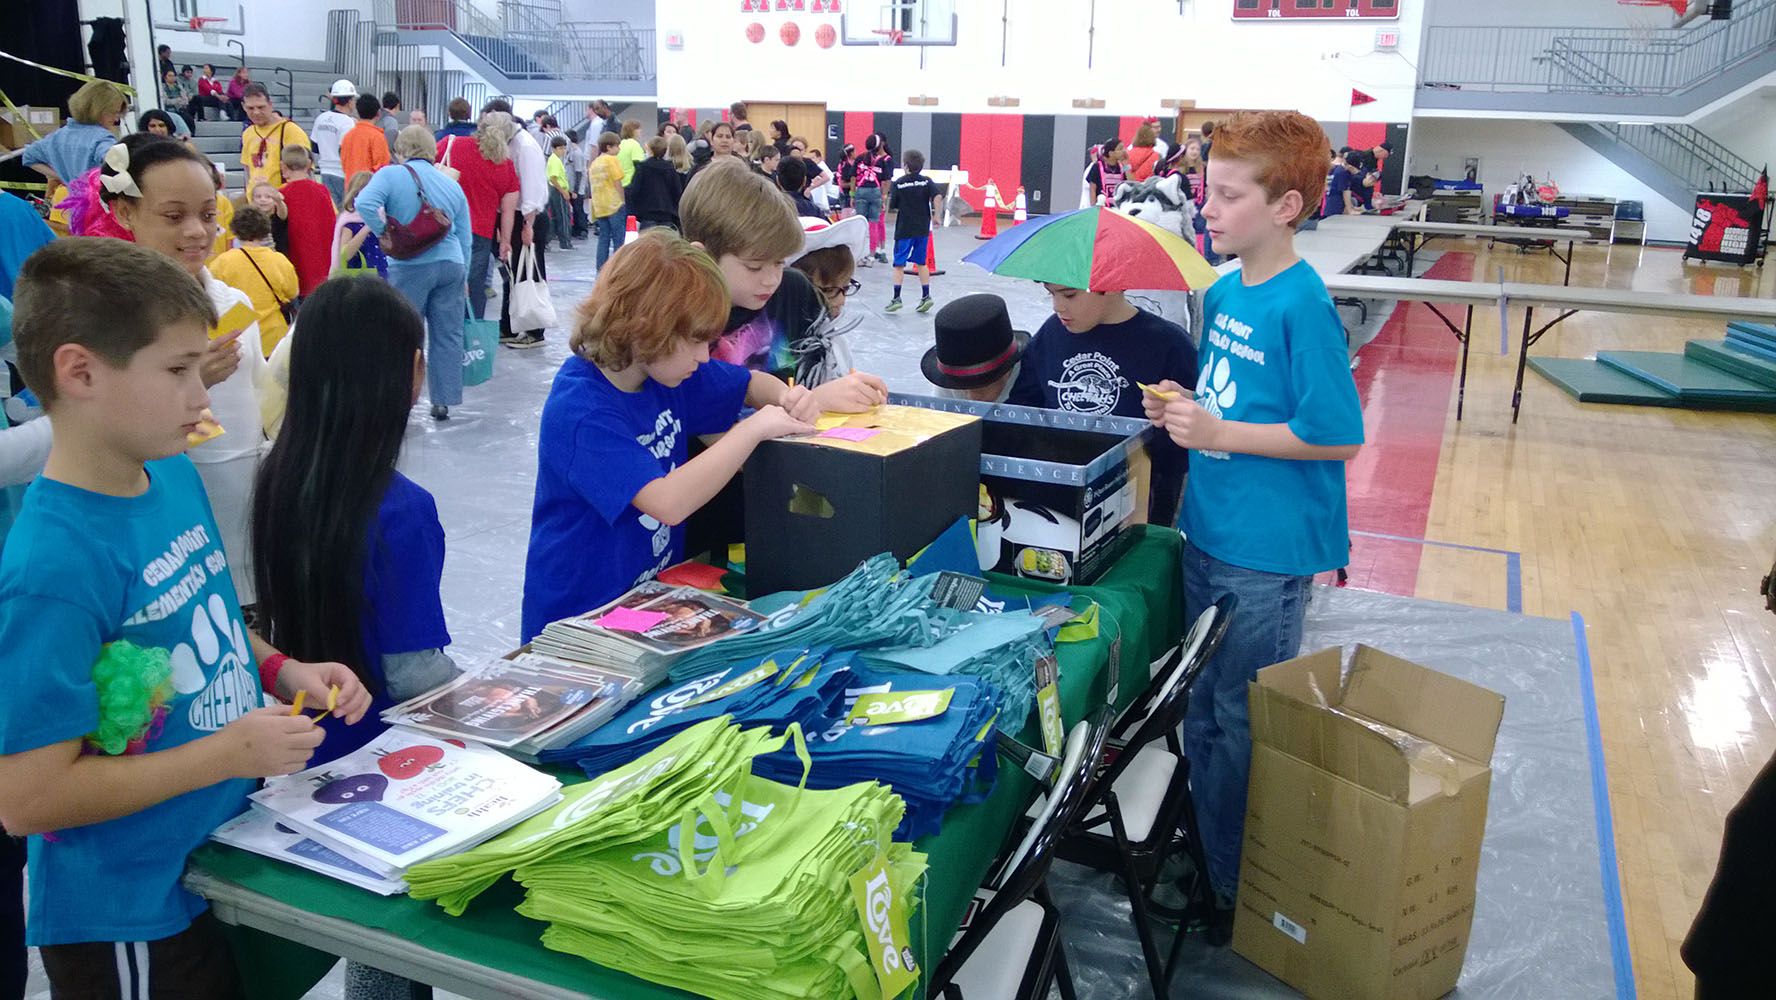 Students selling blue t-shirts.